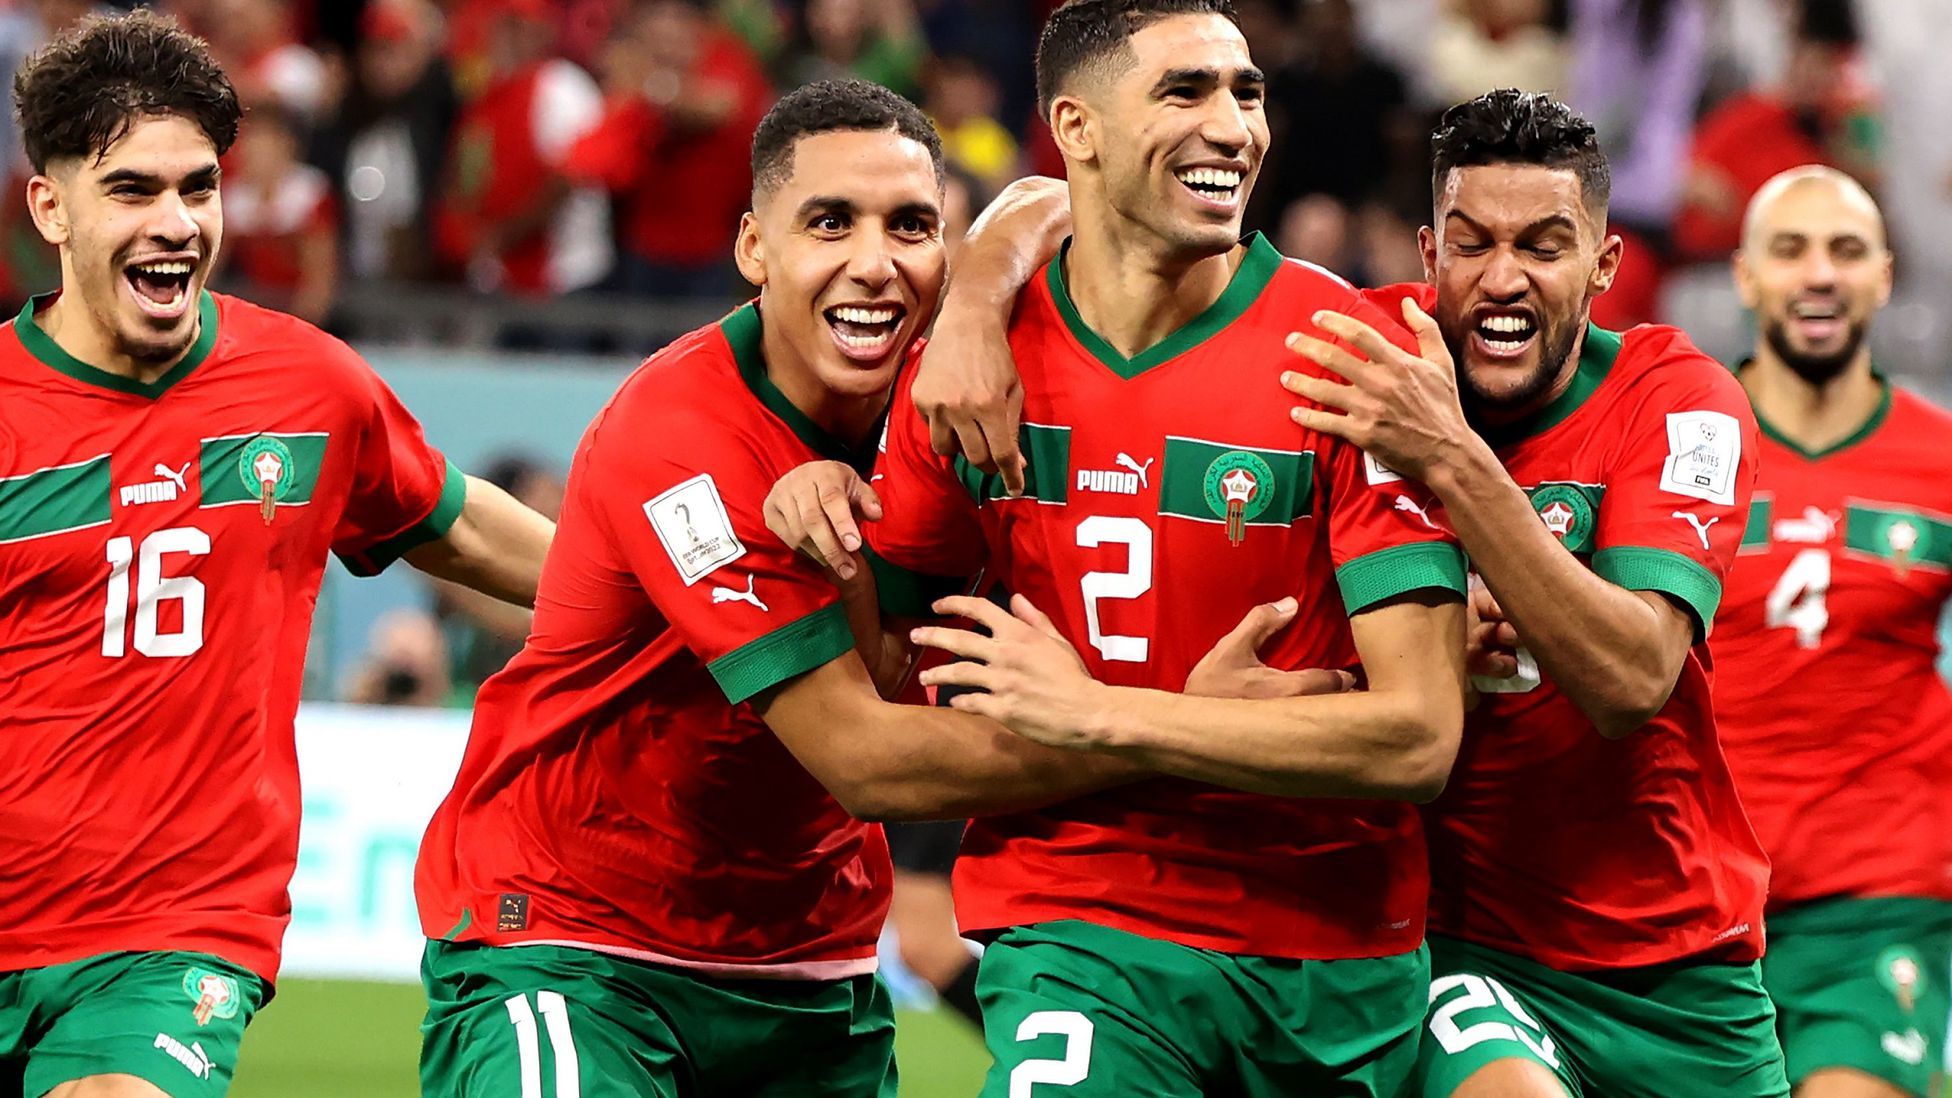 Morocco vs Portugal, December 10: Head-to-Head Statistics, Line-ups, Prediction for the 2022 World Cup Match